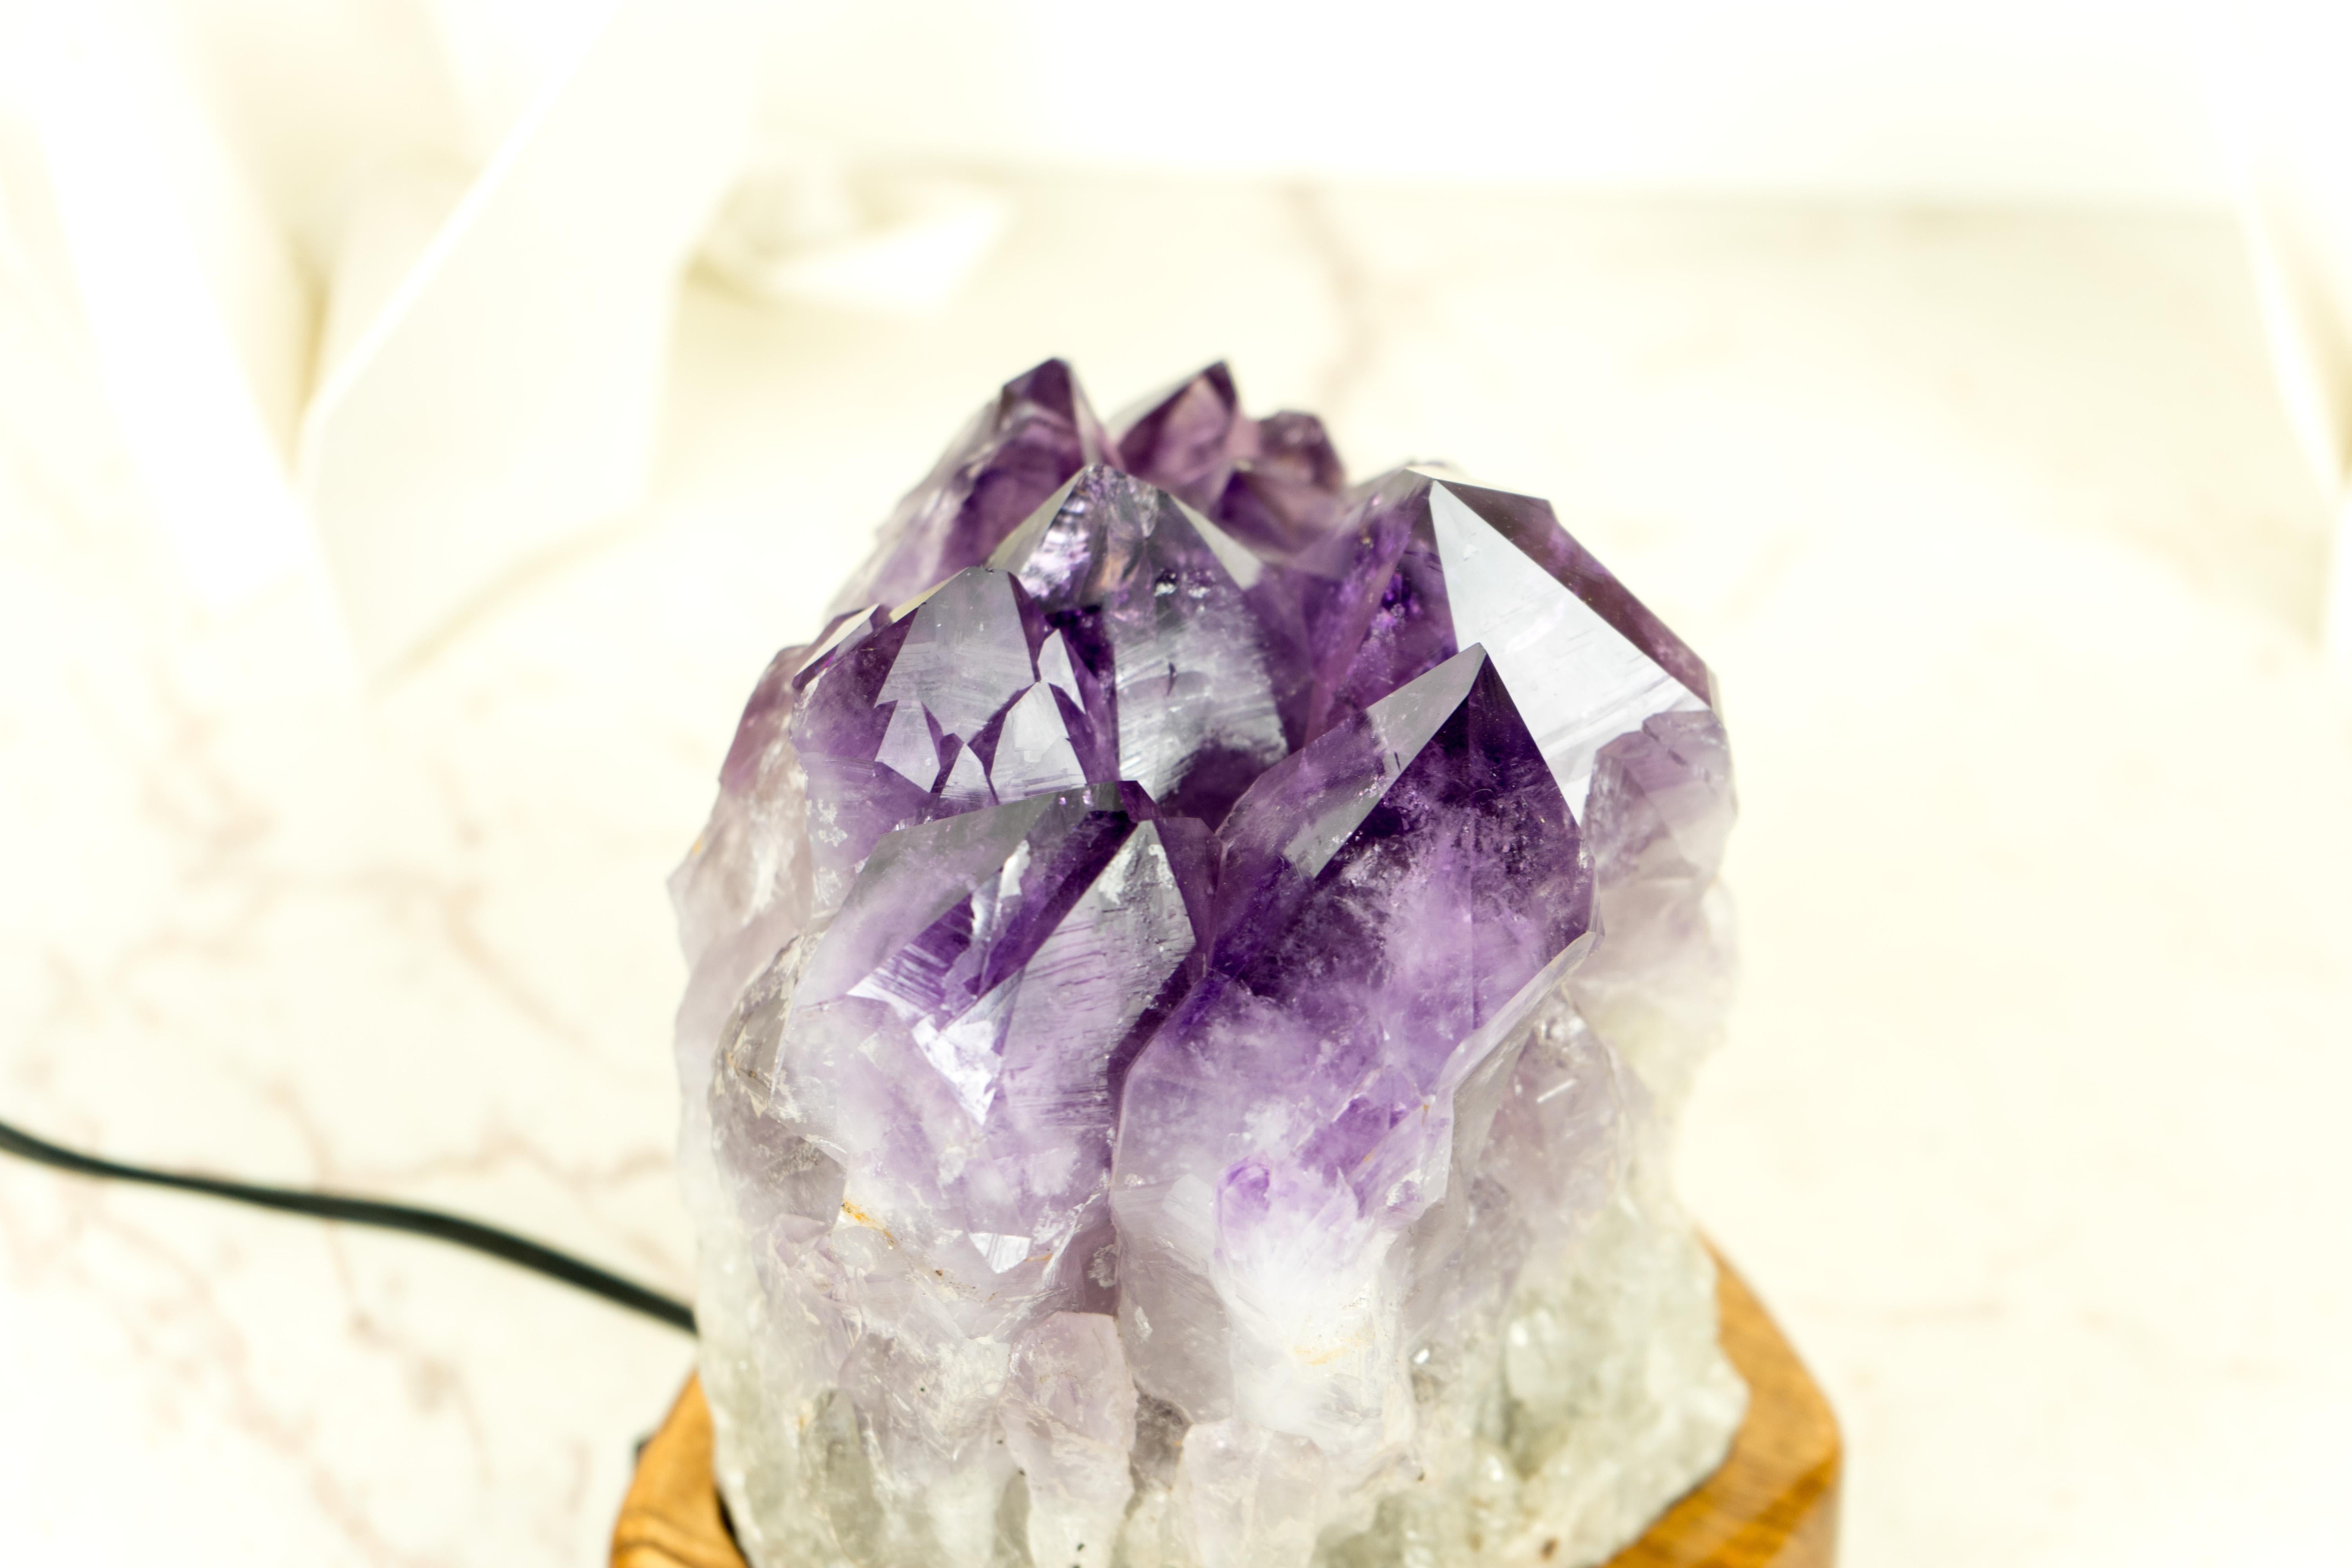 Designed by E2D Crystals, this Amethyst table lamp is an exquisite piece of decor. Created with a focus on uniqueness, quality, and beauty, this lamp showcases both natural artwork and skilled craftsmanship. 

The lamp was designed to blend the